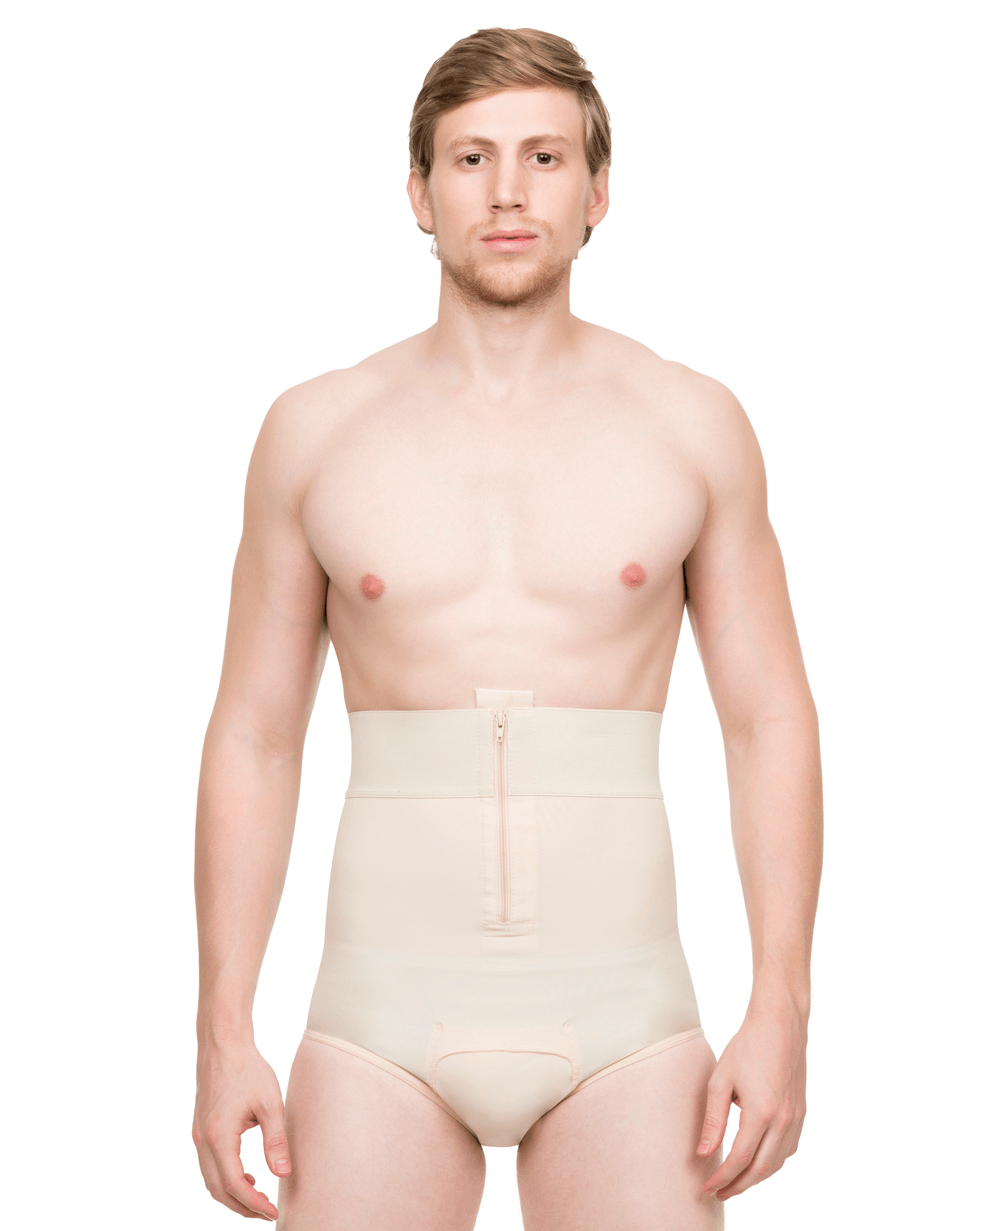 Male High-Waist Abdominal Cosmetic Surgery Compression Brief with Zippers  (MG01)